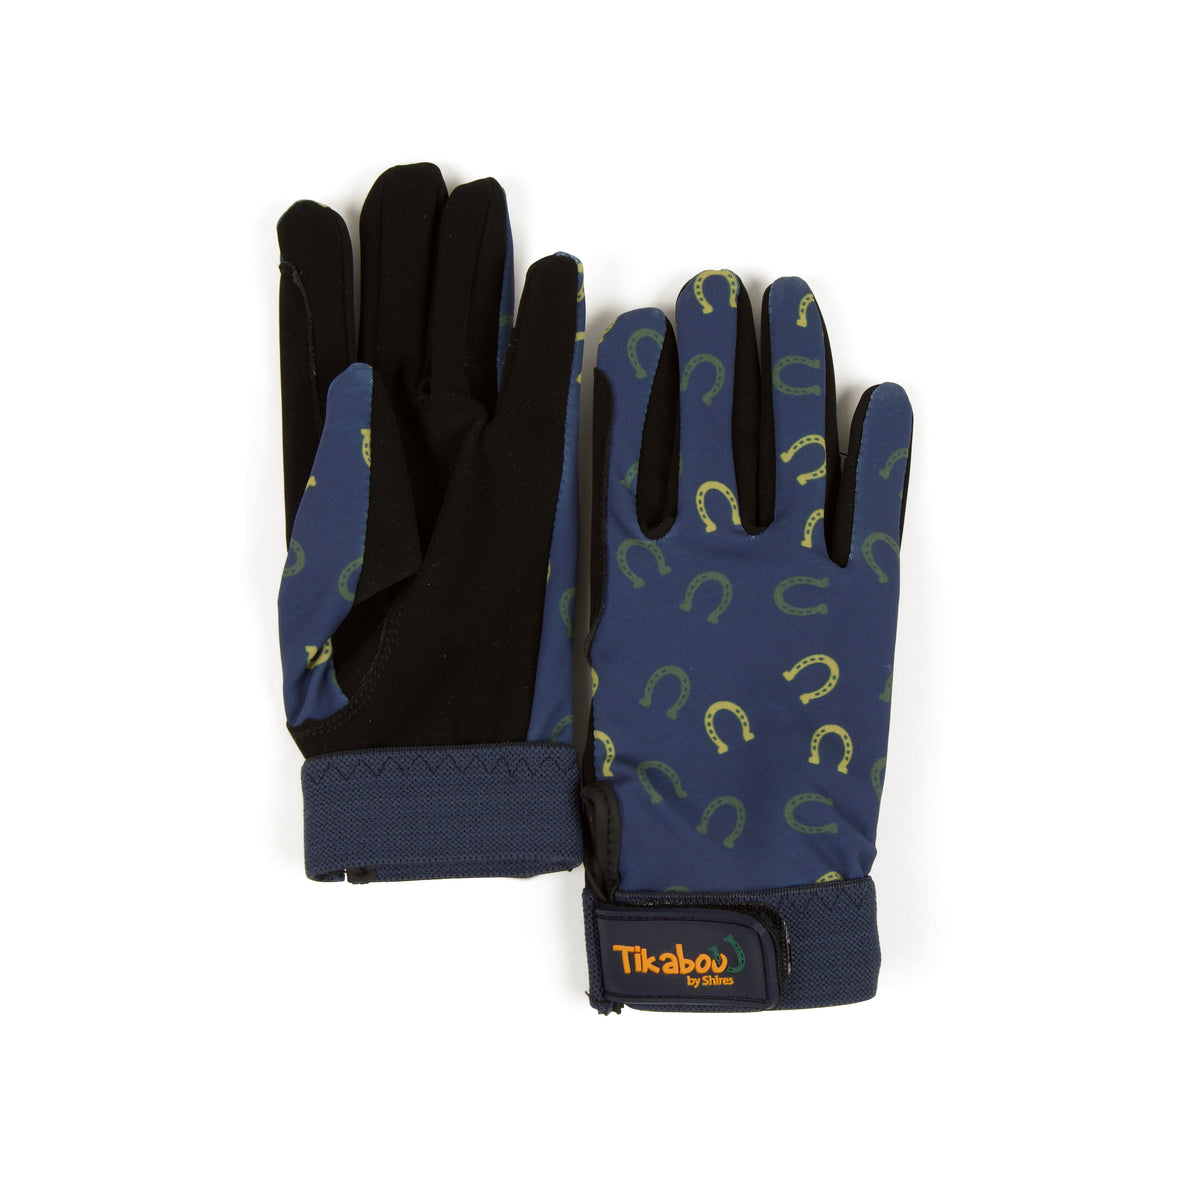 Shires Tikaboo Childrens Riding Gloves